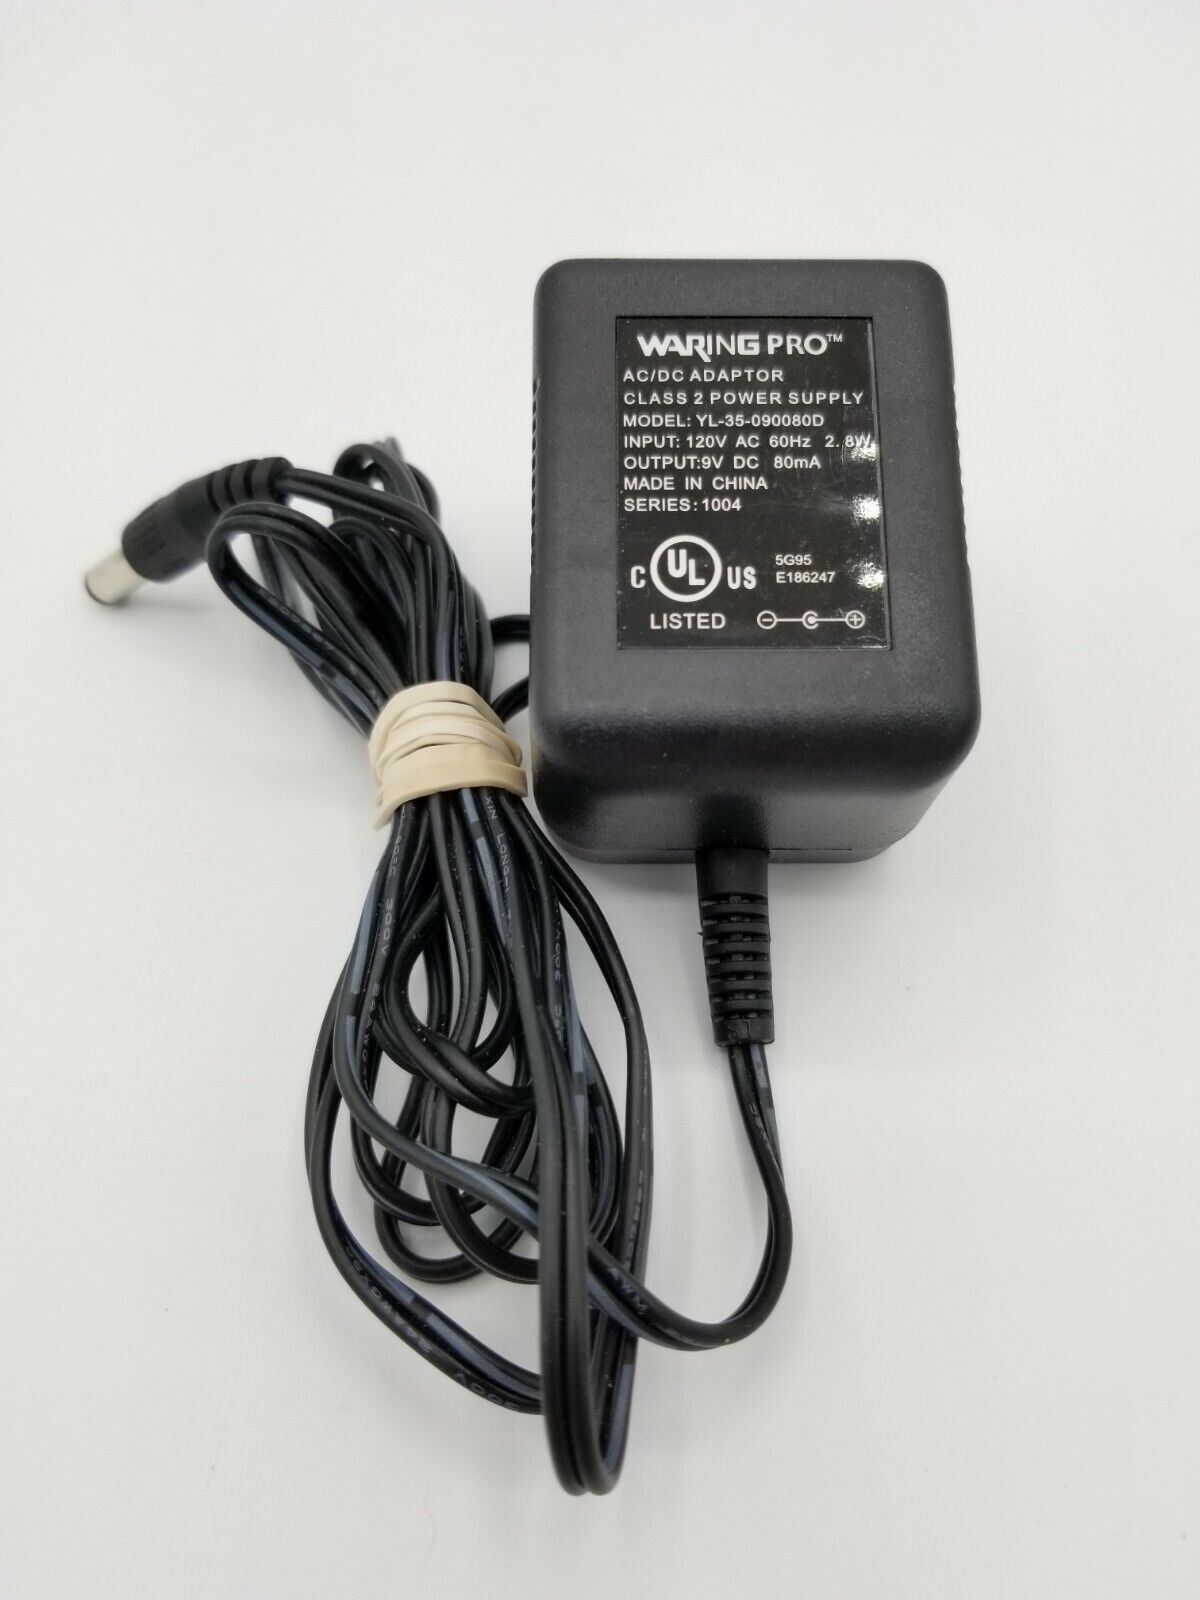 Waring Pro Charger AC/DC Adaptor Power Supply YL-35-090080D 9V 80mA Series 1103 Brand: Waring Pro Compatible Brand: F